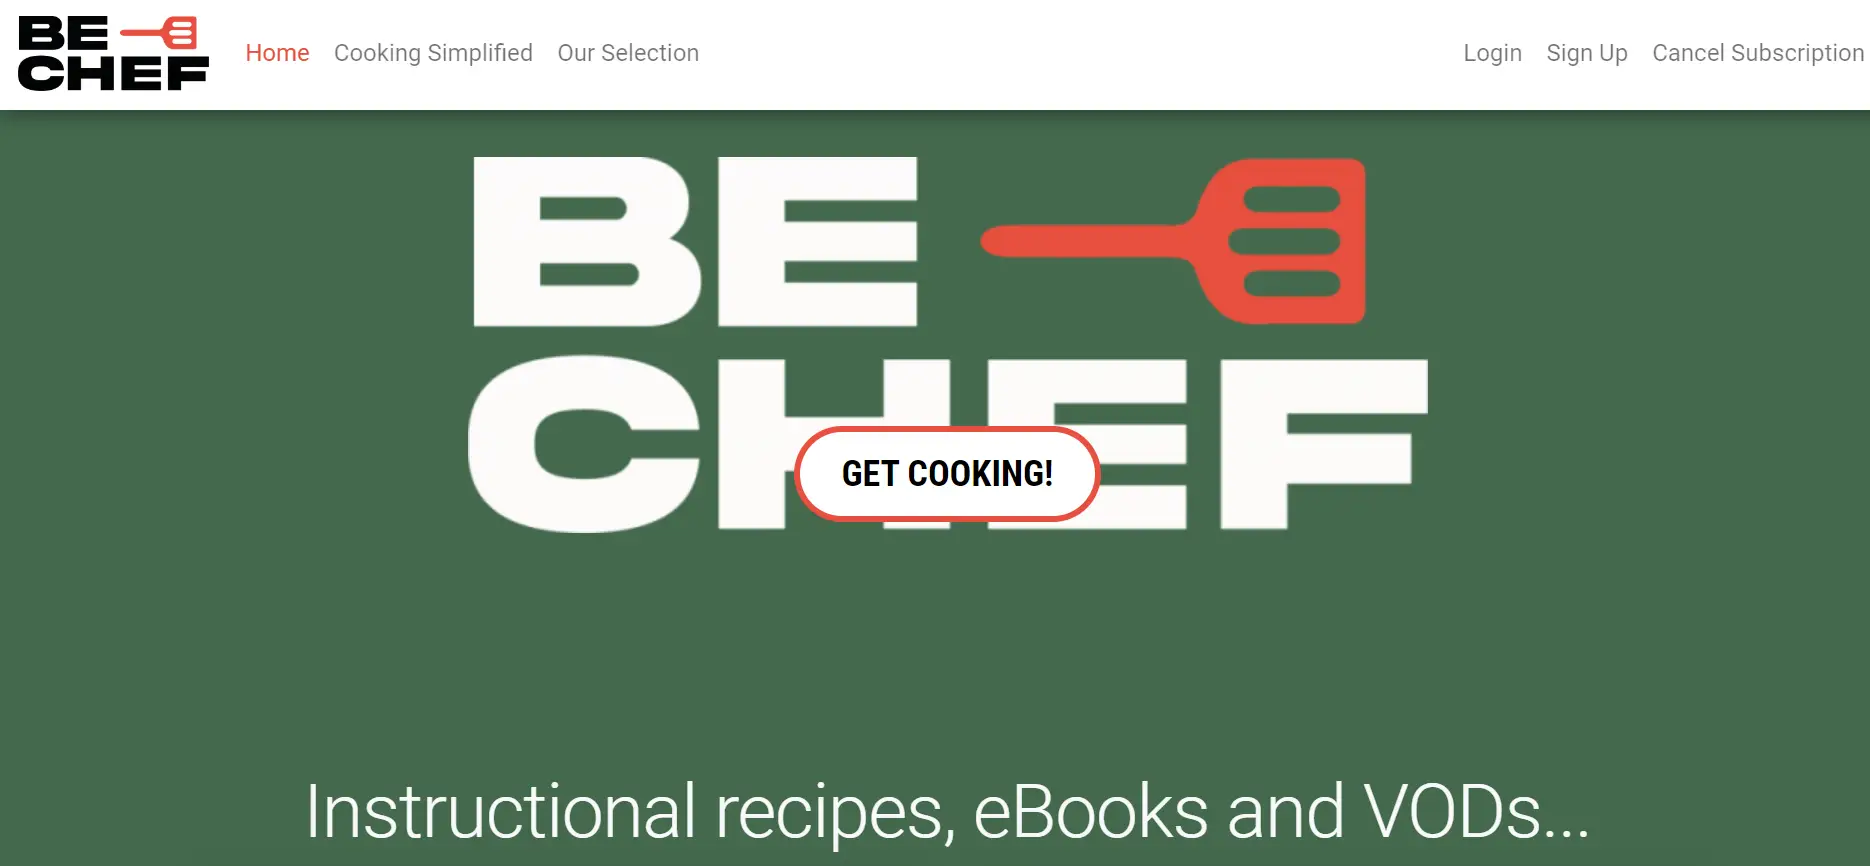 You are currently viewing Is Bechef.Club Scam or Legit? Don’t Fall for Their Subscription Trap!